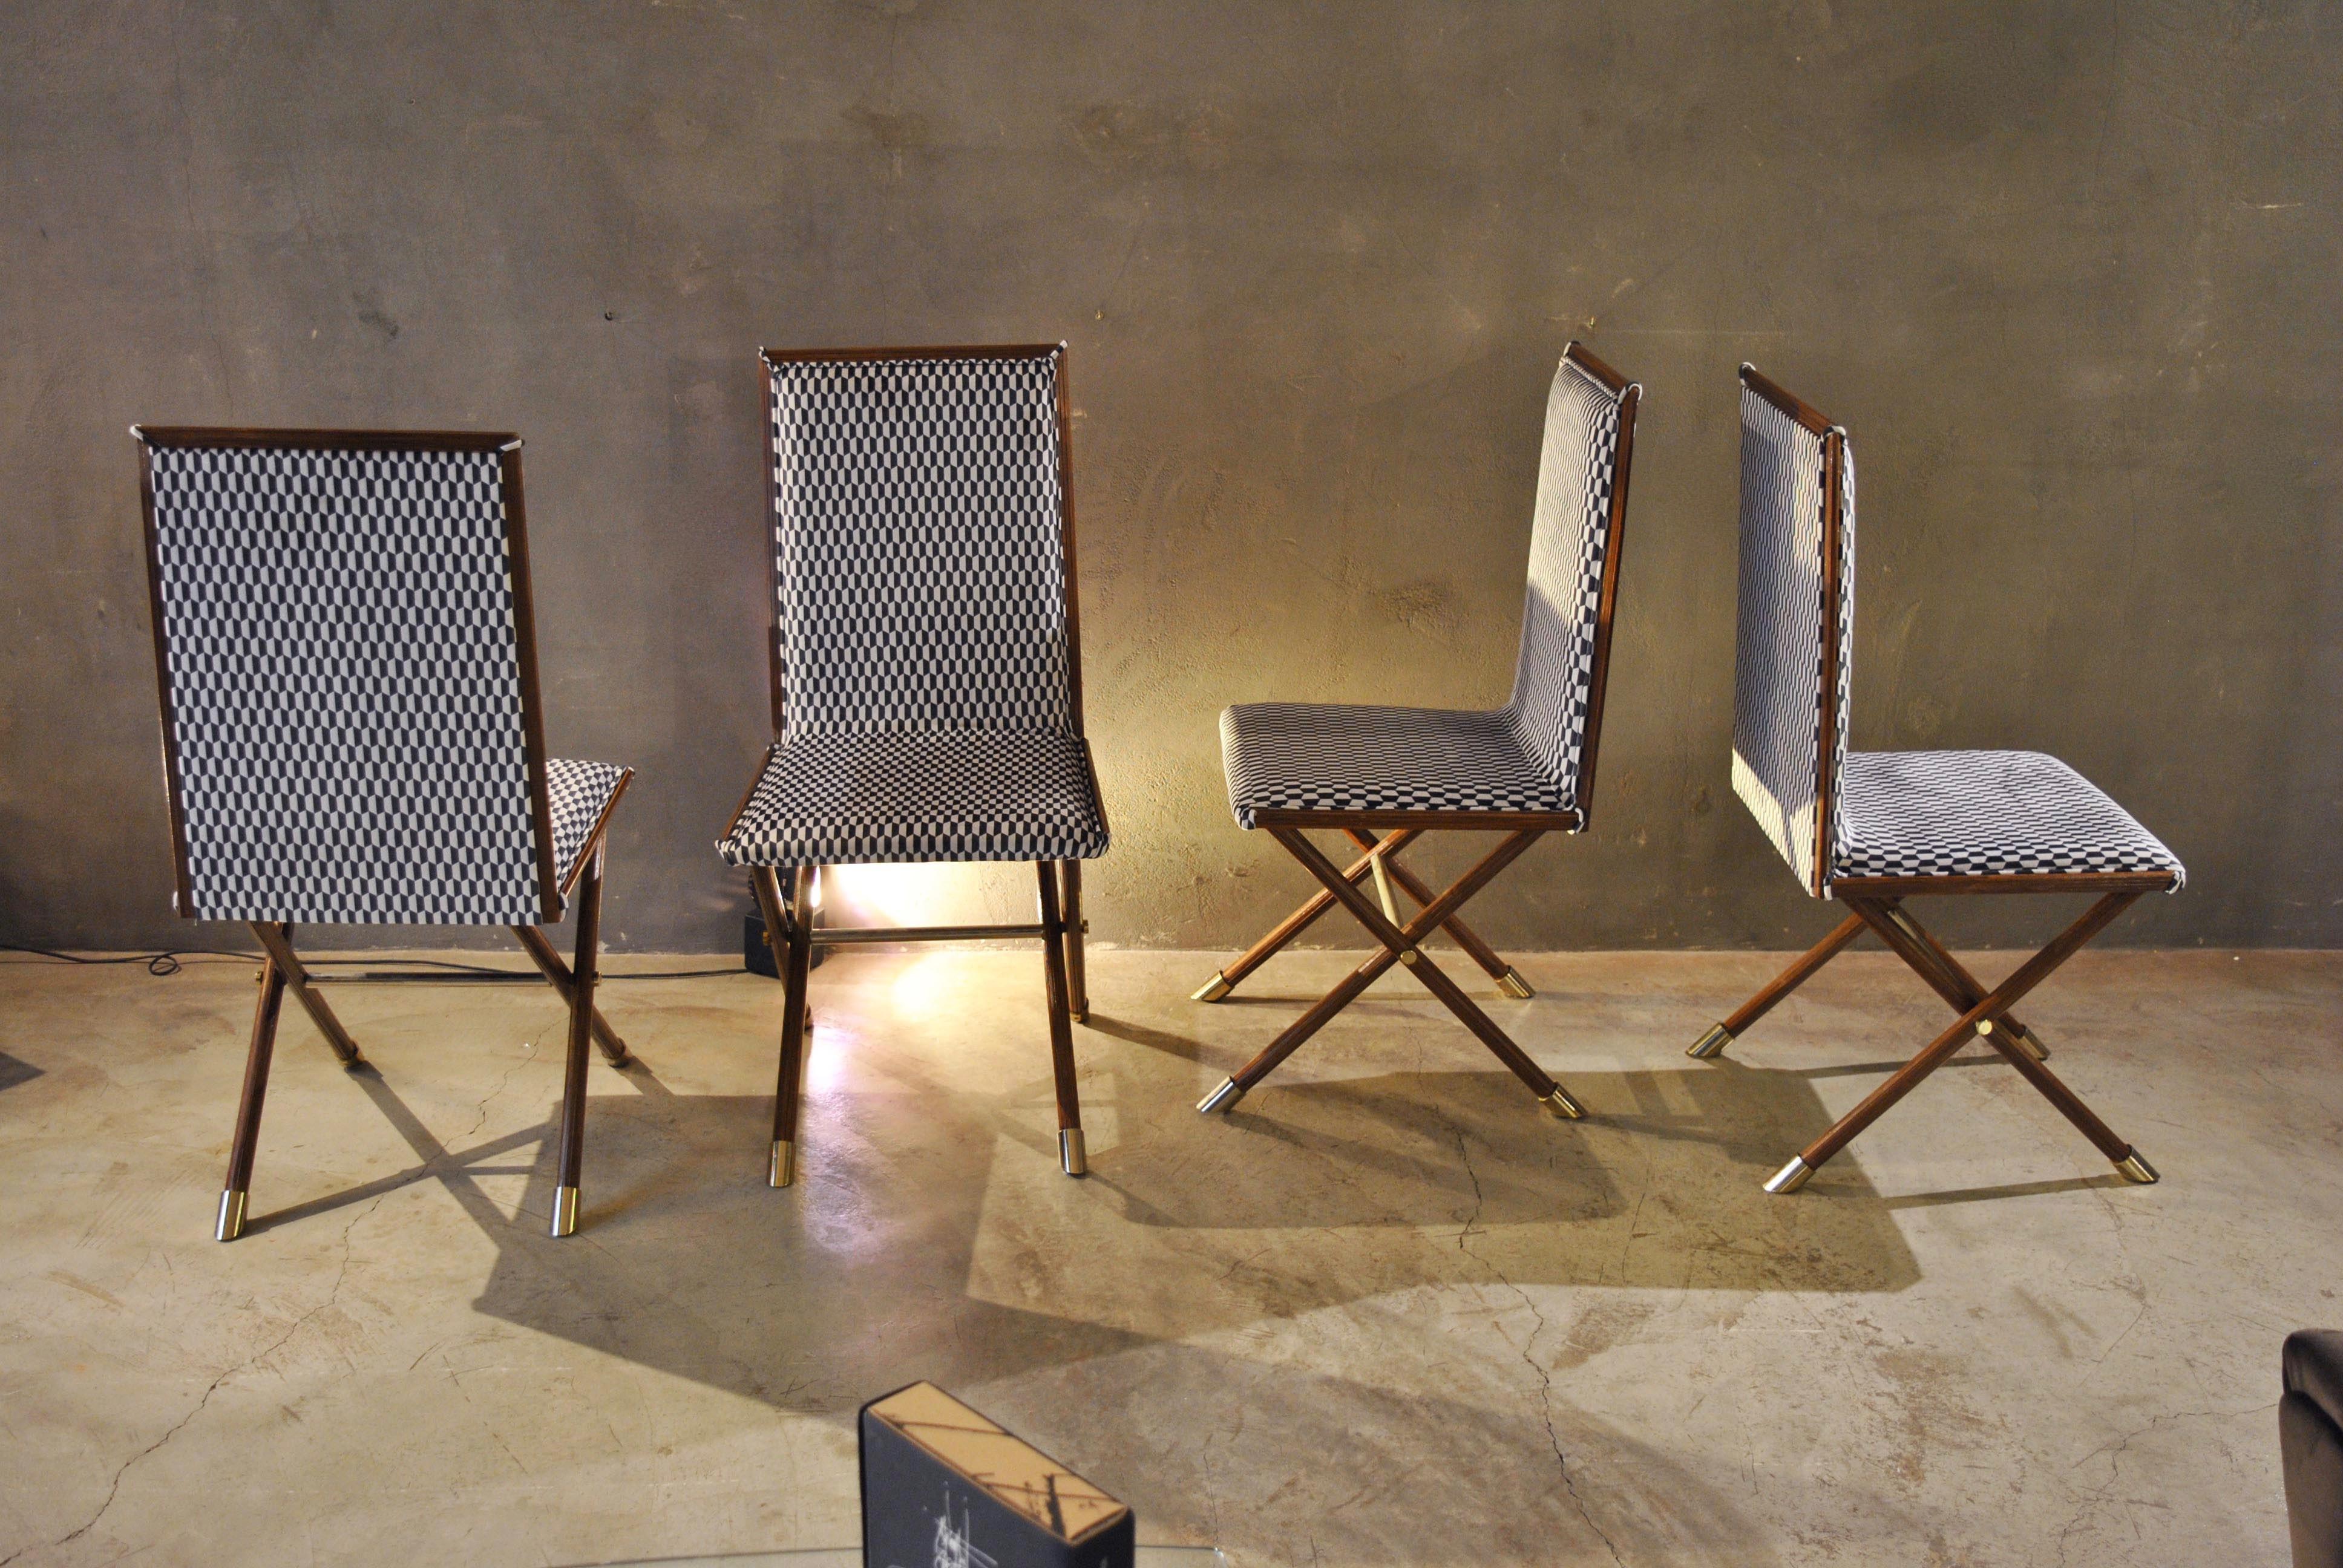 Italian midcentury wooden chairs with brass fittings

Four elegant wooden chairs with brass fittings covered in a new fabric with geometric patterns.